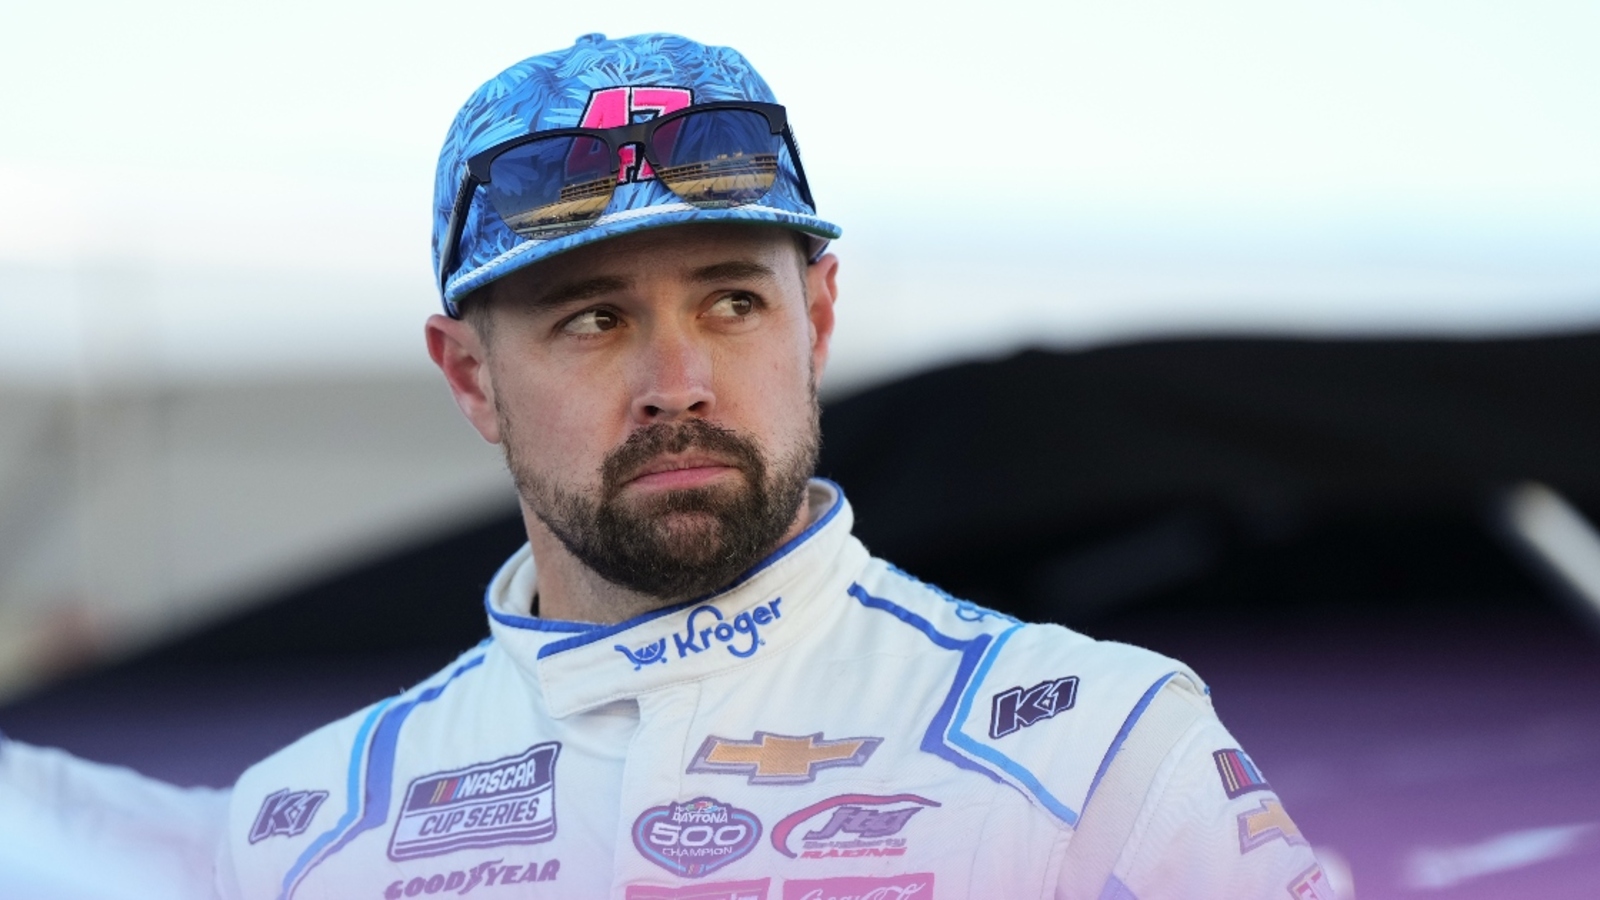 Ricky Stenhouse Jr. addresses if he will talk to Kyle Busch before the Coca-Cola 600 in Charlotte